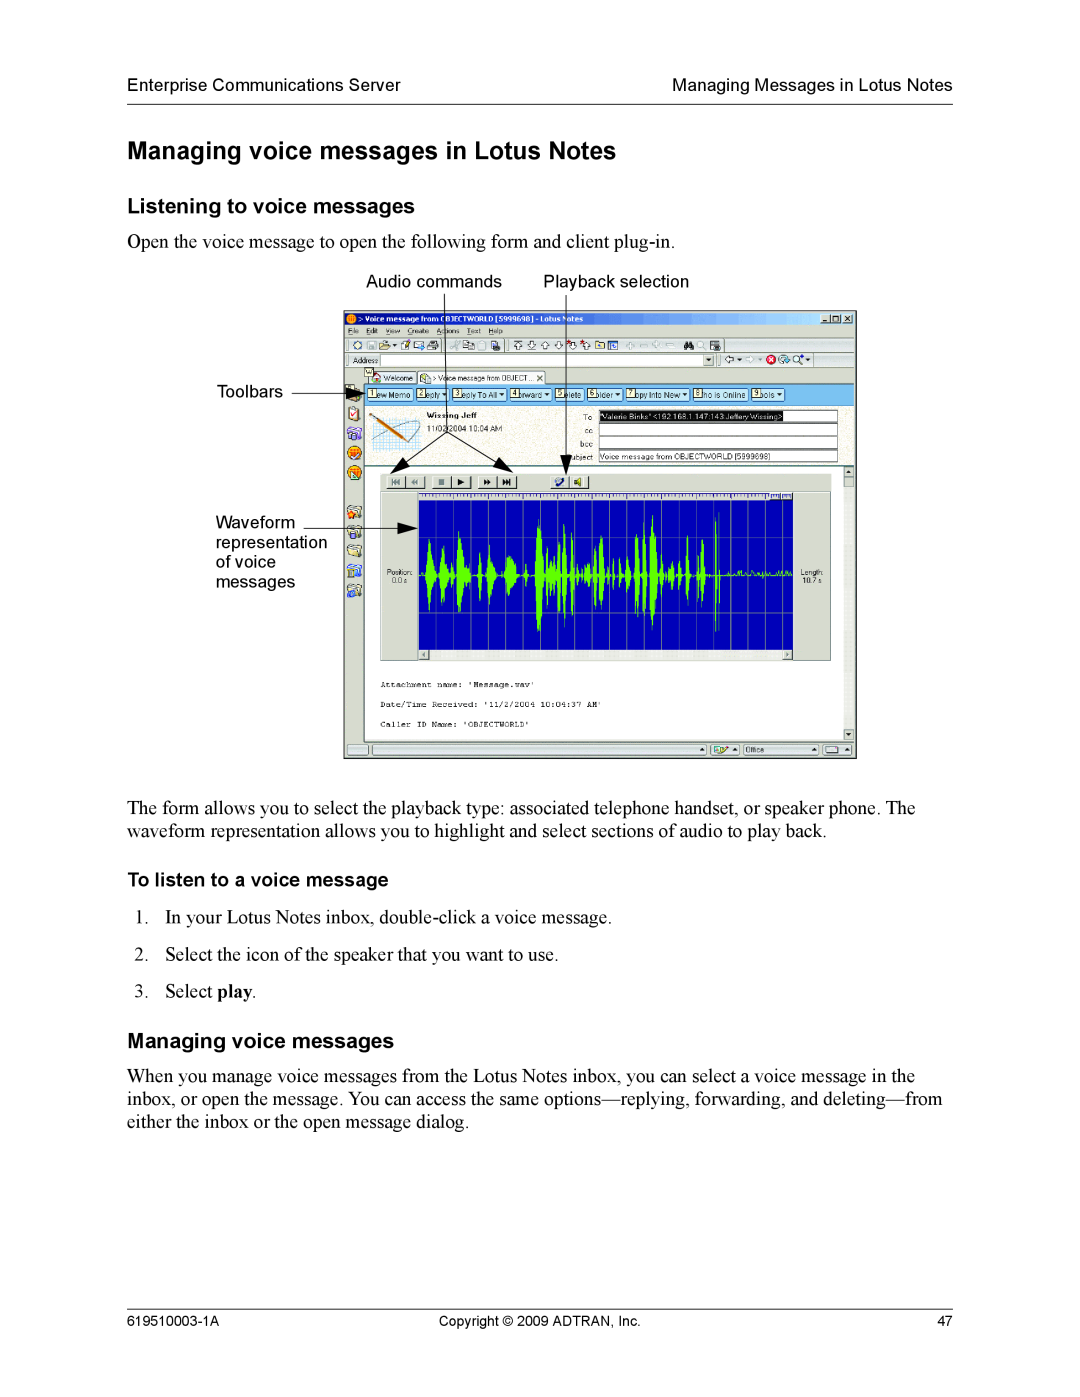 ADTRAN 619510003-1A Managing voice messages in Lotus Notes, Listening to voice messages, To listen to a voice message 